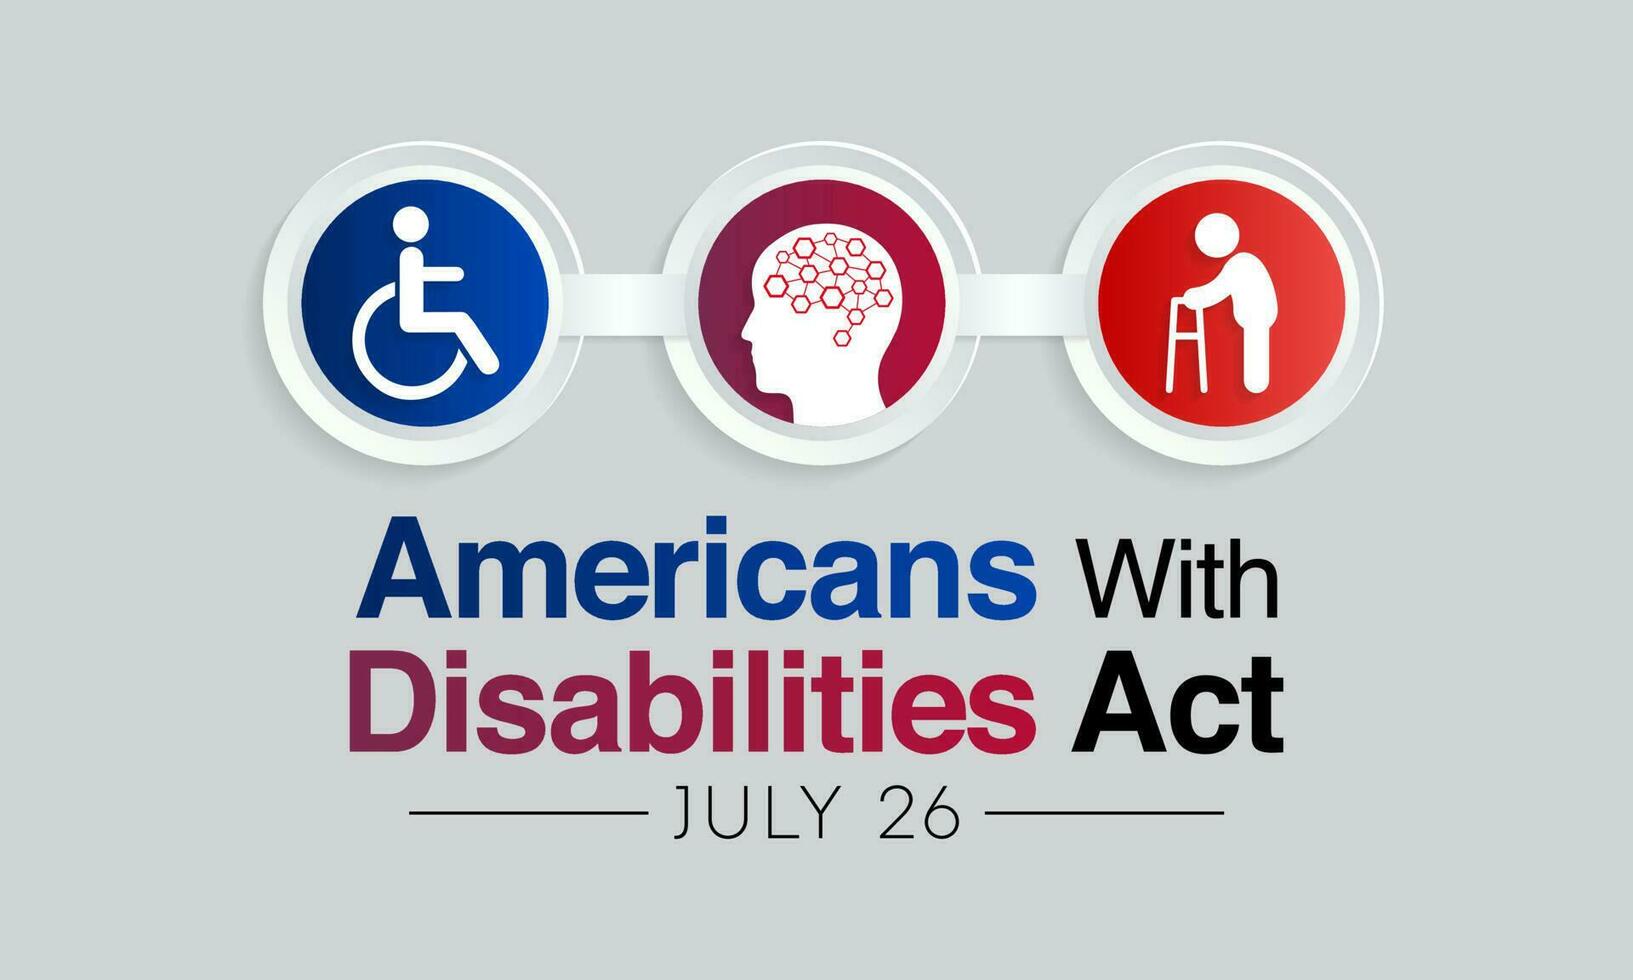 Americans with disability act is observed every year on July 26, ADA is a civil rights law that prohibits discrimination based on disability. Vector illustration